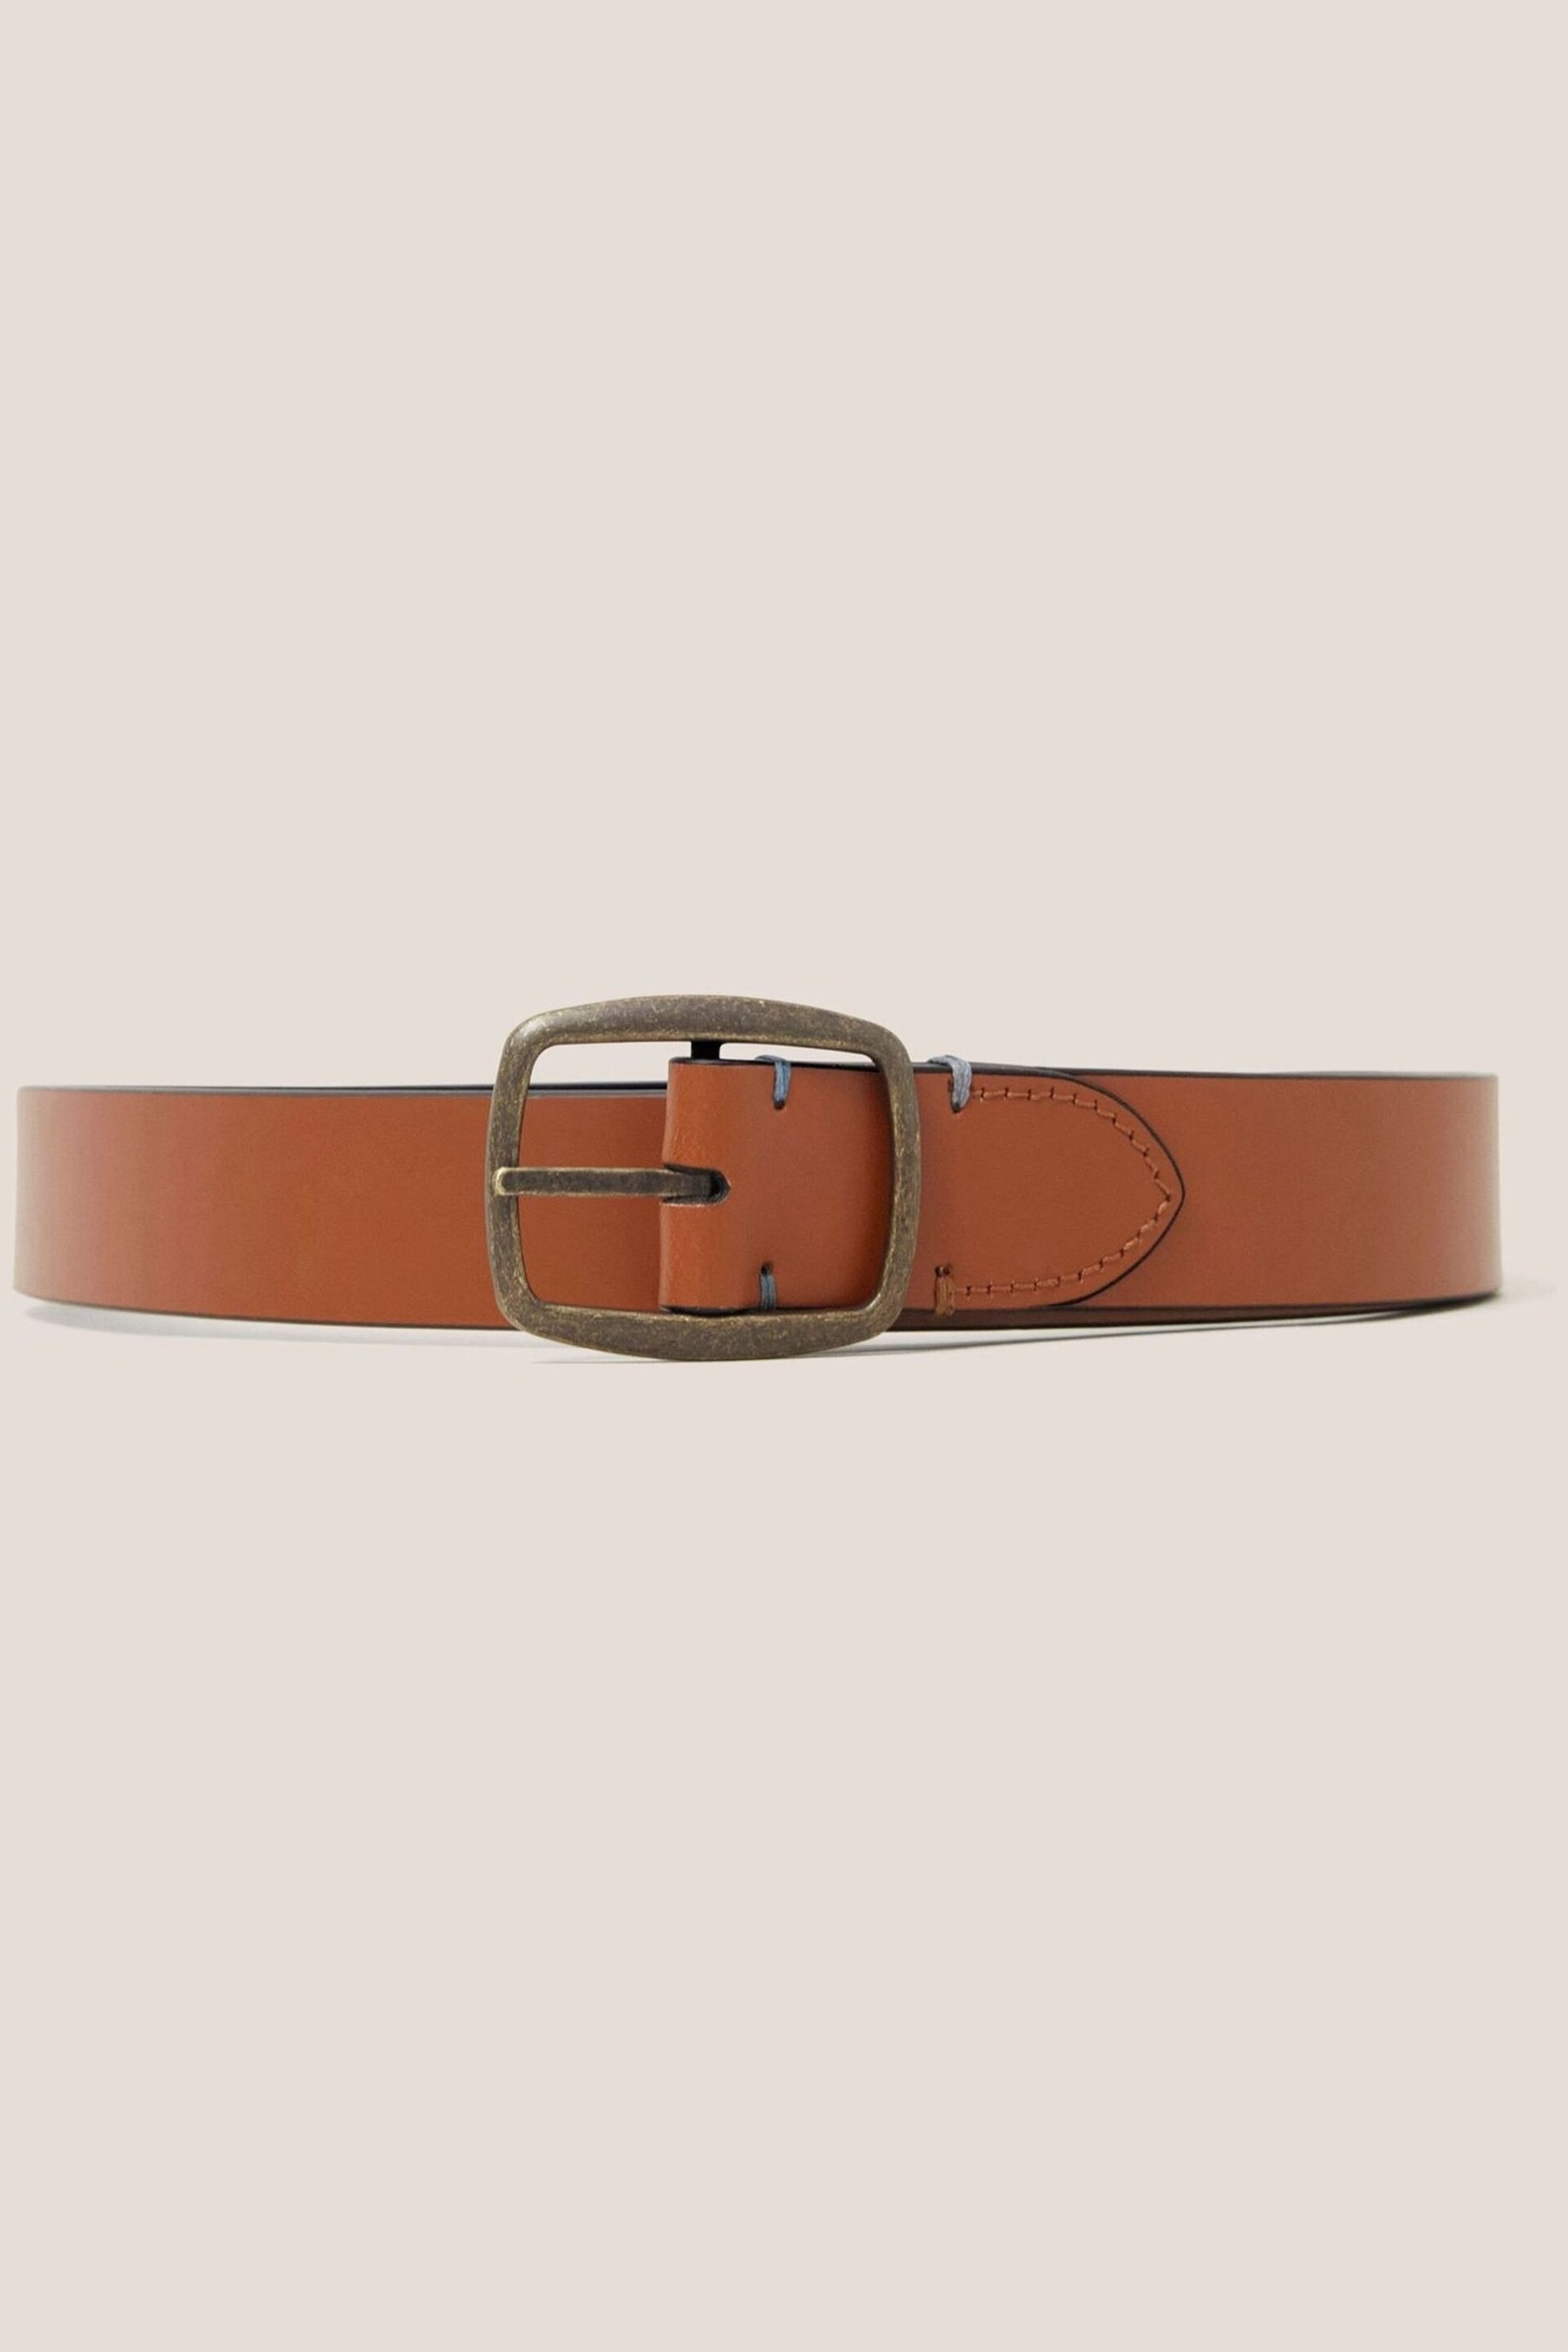 White Stuff Natural Reversible Leather Belt - Image 1 of 2